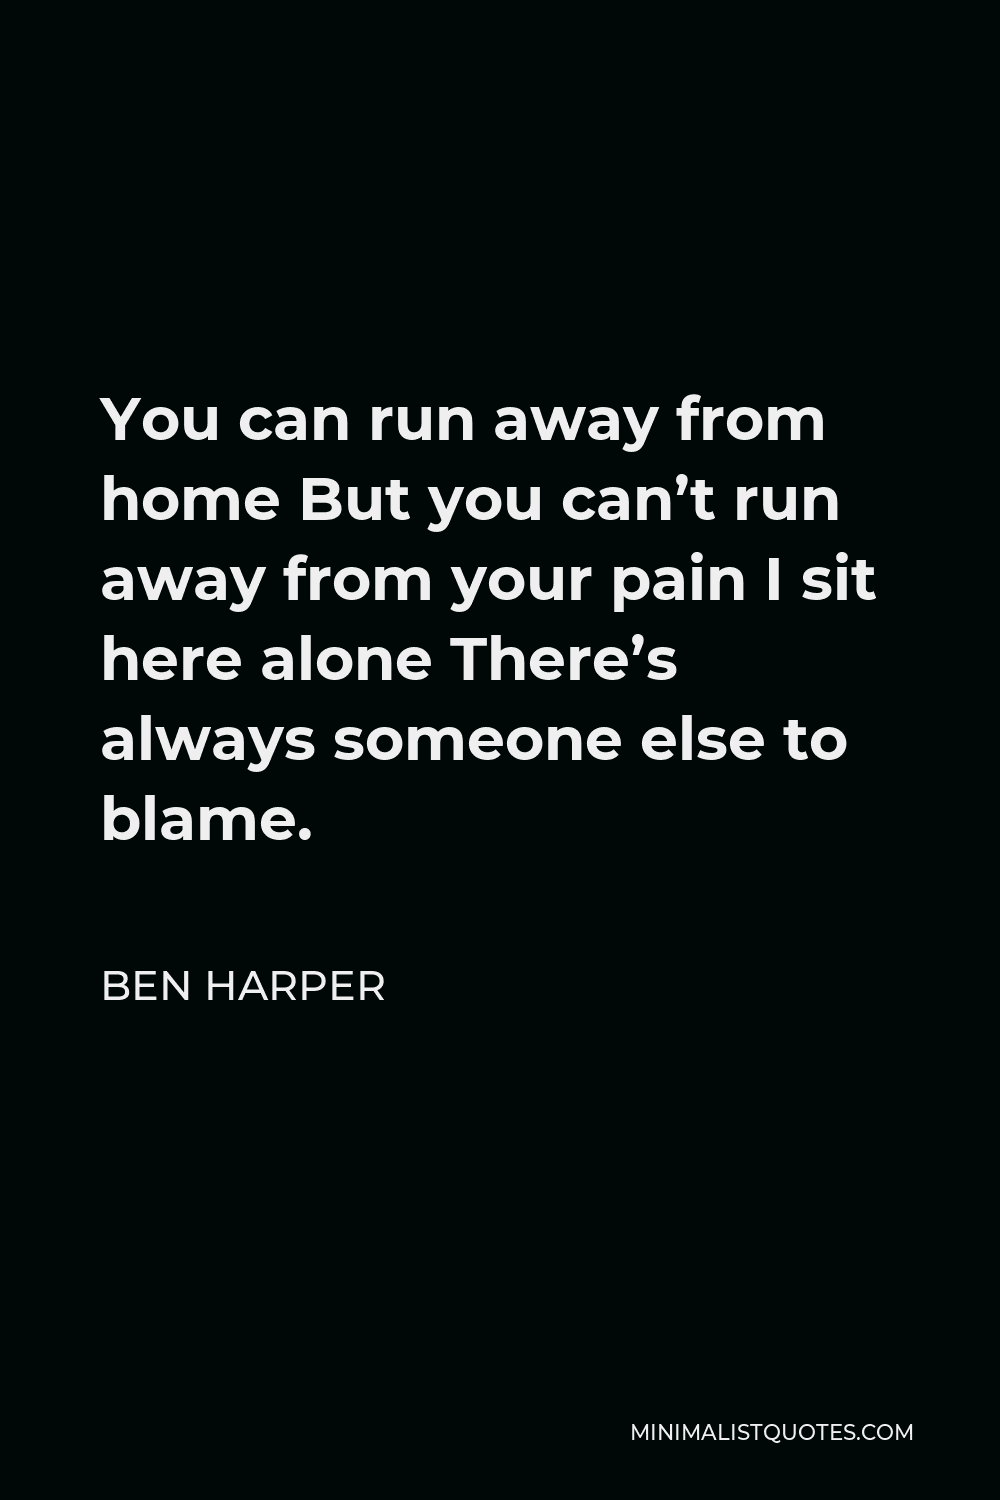 Ben Harper Quote - You can run away from home But you can’t run away from your pain I sit here alone There’s always someone else to blame.